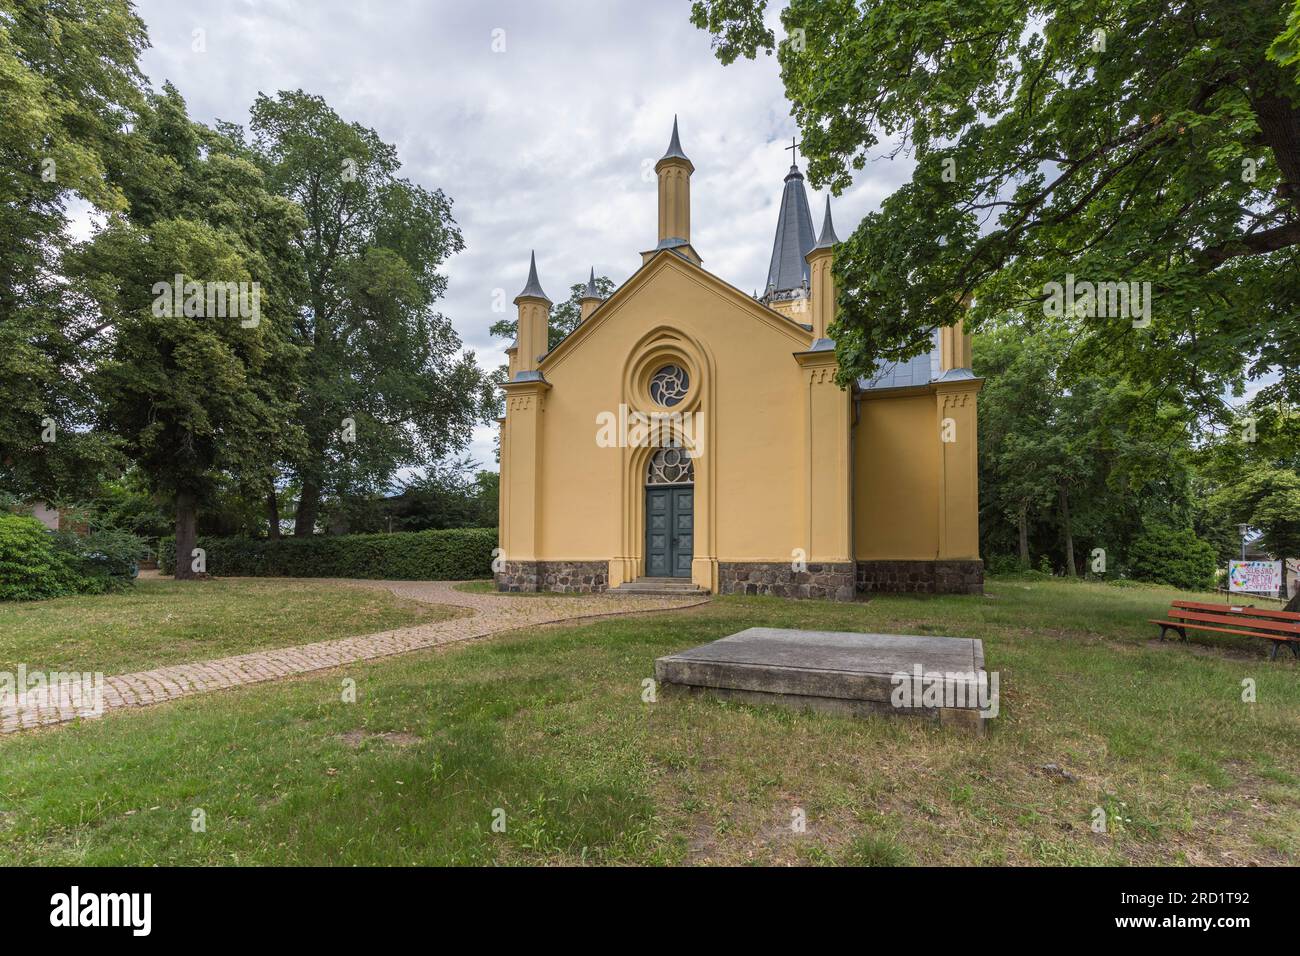 The Evangelical Schinkel Church, located in Großbeeren (Teltow-Fläming district) in the state of Brandenburg, was built from 1818 to 1820 based on a d Stock Photo